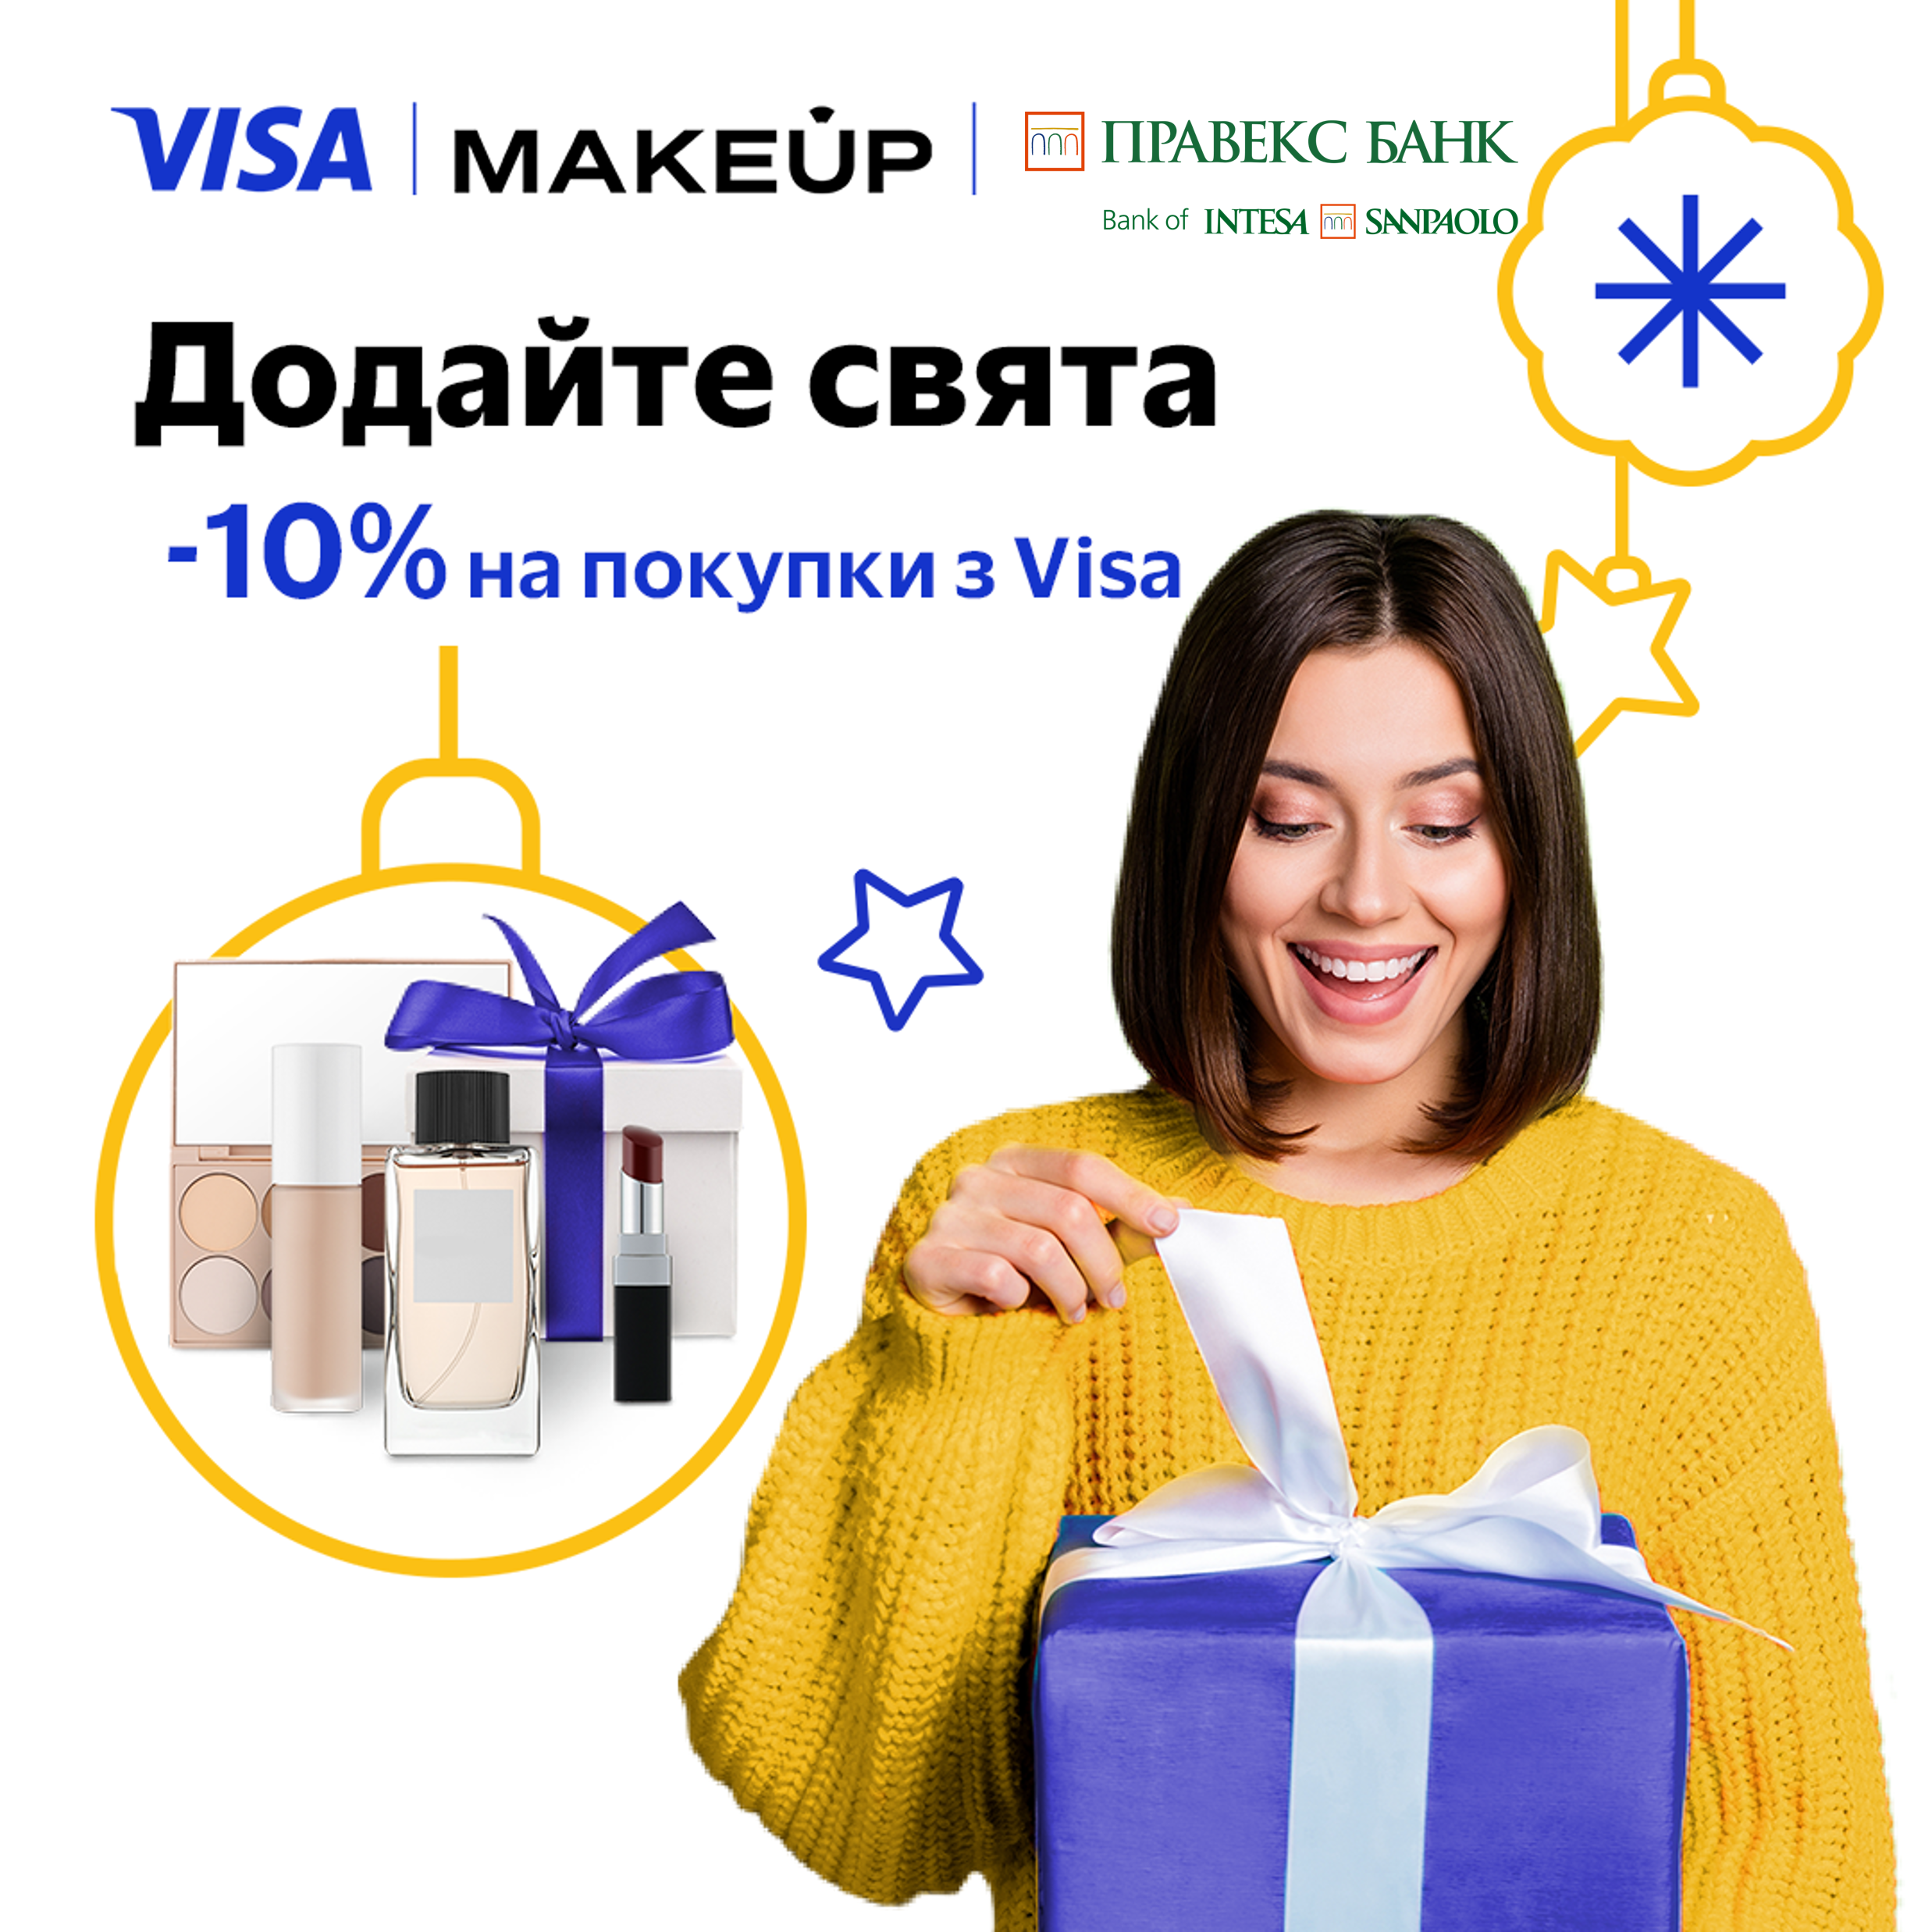 Special offer from Visa and Makeup